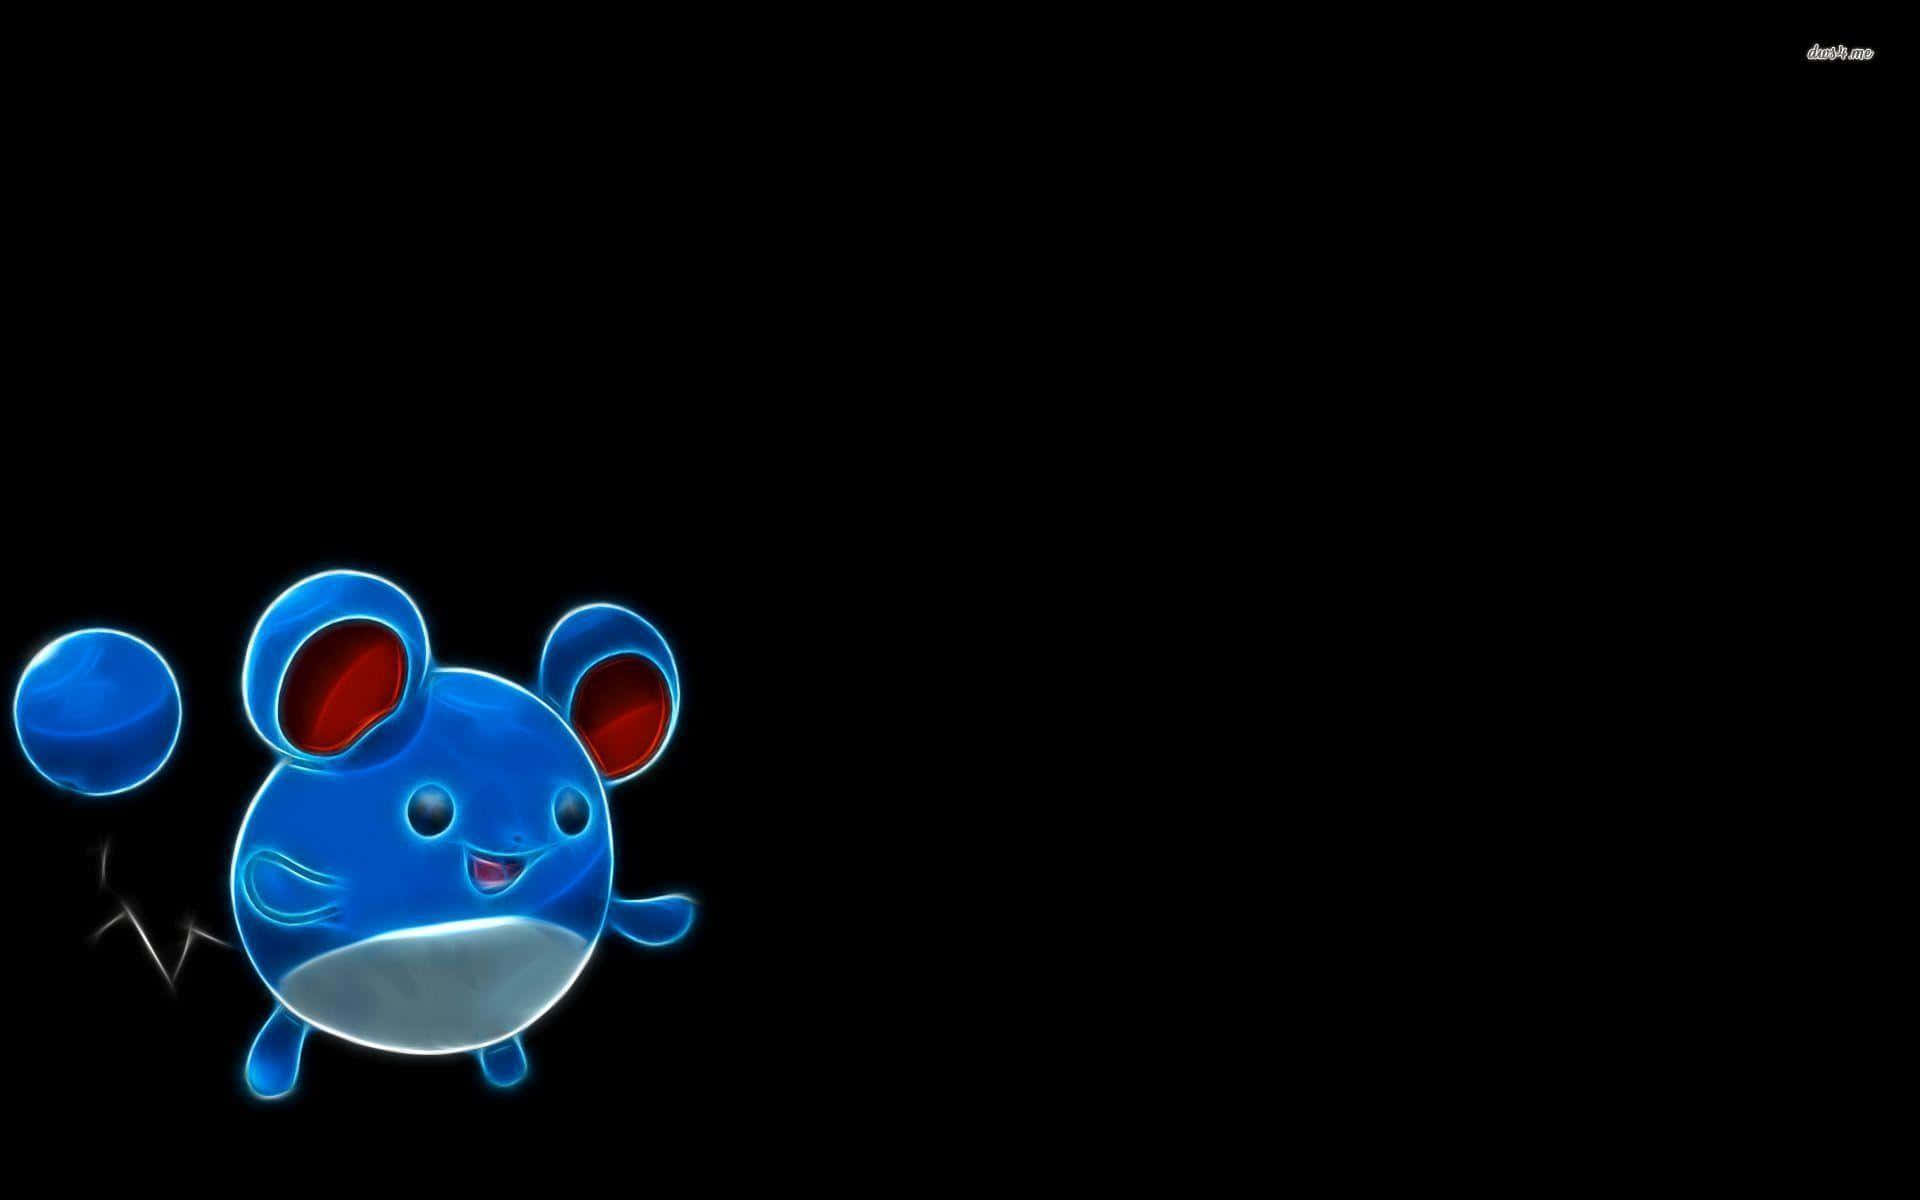 Azurill - The Polka Dot Pokémon In A Playful Mood. Enjoy A Glimpse Of The Cuteness Through This Hd Image. Wallpaper